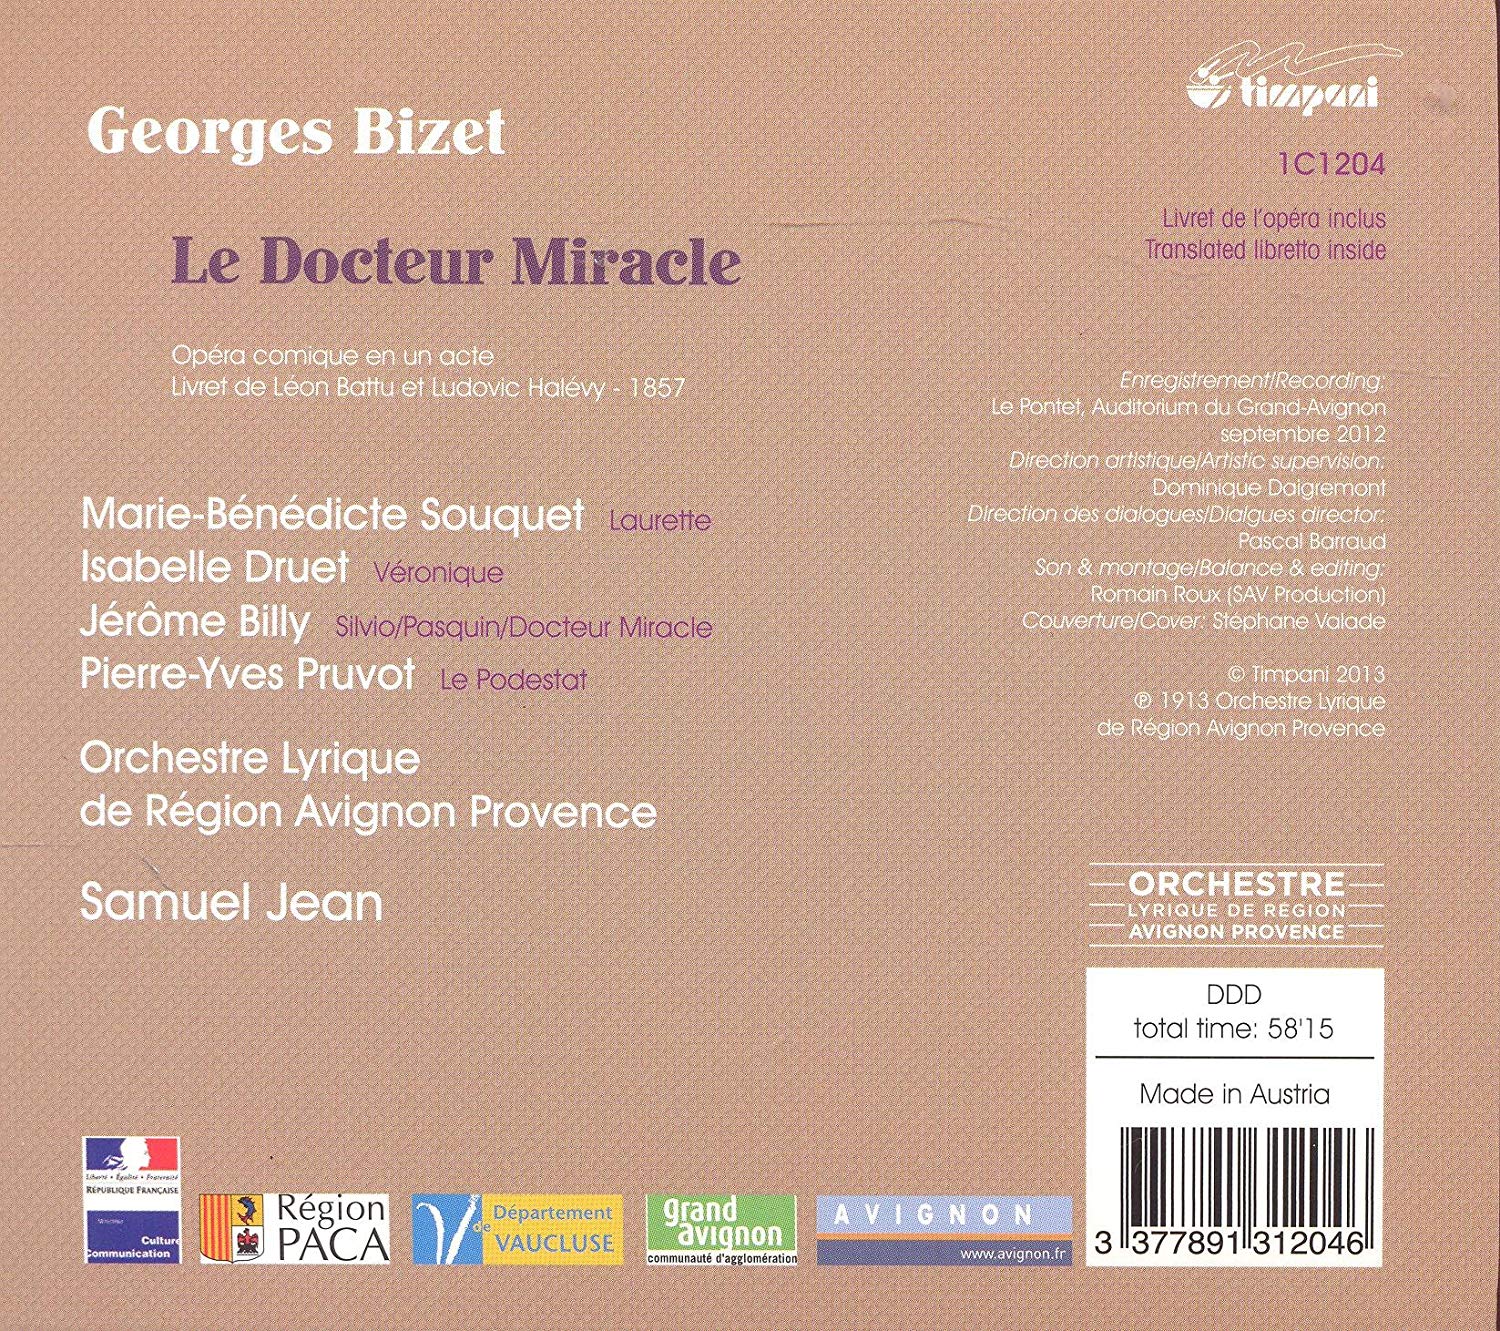 Georges Bizet: Le Docteur Miracle, Opera in one act - slide-1